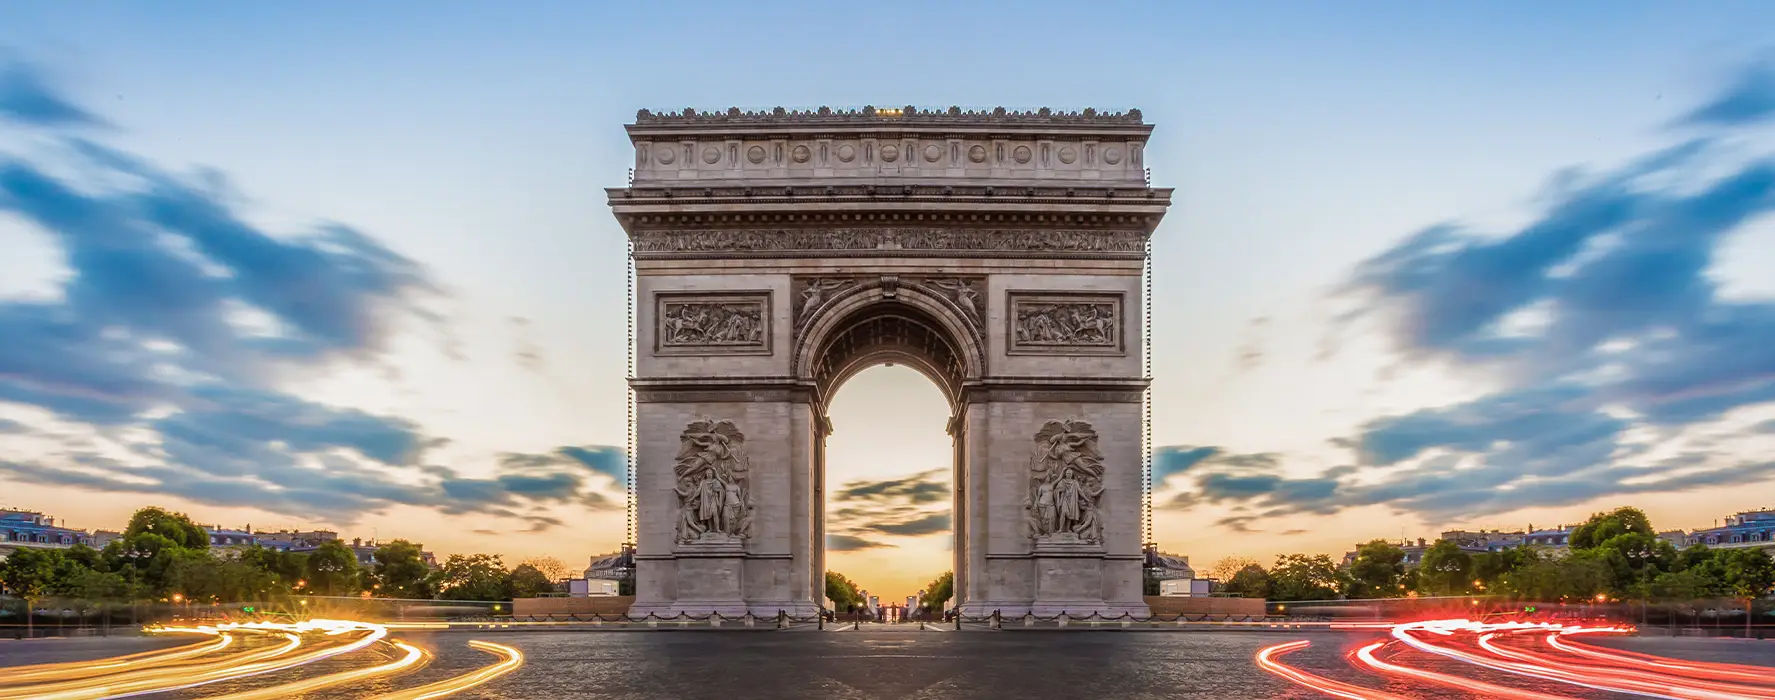 A photo of the sun setting with the Arc de Triomphe in the foreground.